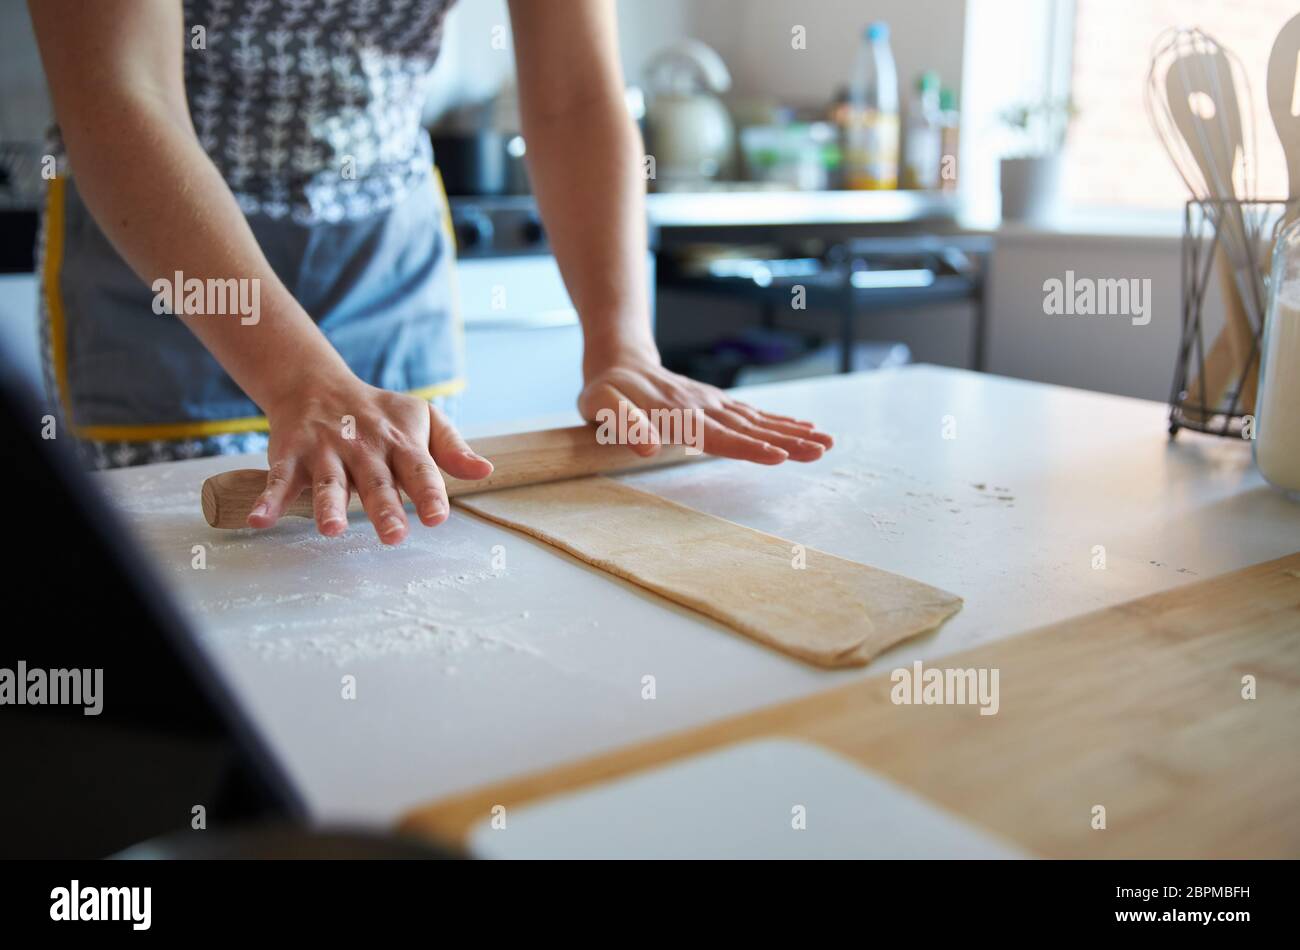 Anonymous person using a rolling pin to make fresh pasta at home. Stock Photo